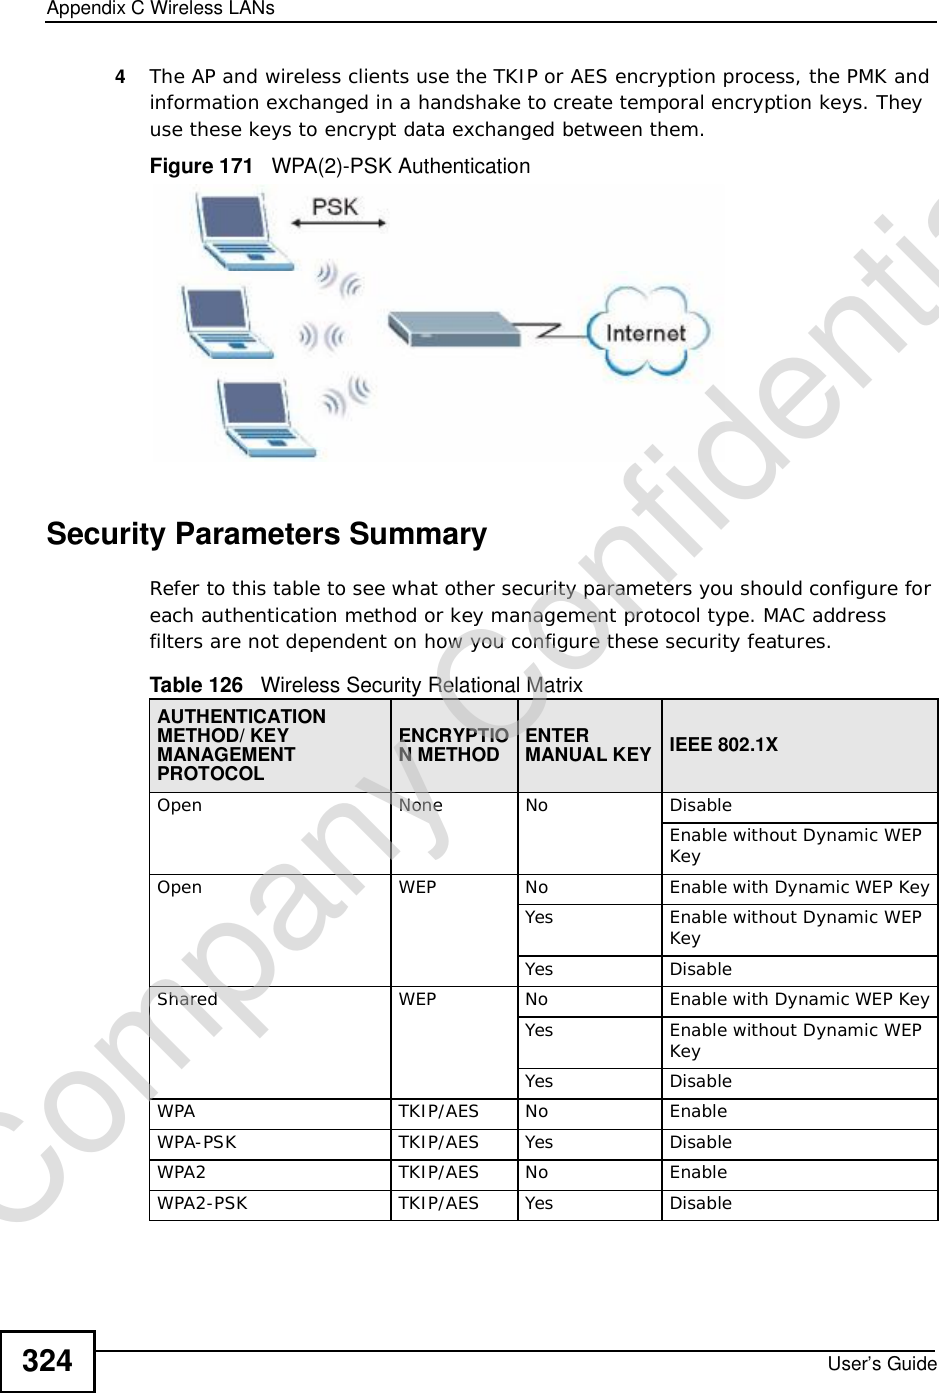 Appendix CWireless LANsUser’s Guide3244The AP and wireless clients use the TKIP or AES encryption process, the PMK and information exchanged in a handshake to create temporal encryption keys. They use these keys to encrypt data exchanged between them.Figure 171   WPA(2)-PSK AuthenticationSecurity Parameters SummaryRefer to this table to see what other security parameters you should configure for each authentication method or key management protocol type. MAC address filters are not dependent on how you configure these security features.Table 126   Wireless Security Relational MatrixAUTHENTICATIONMETHOD/ KEY MANAGEMENTPROTOCOLENCRYPTION METHOD ENTERMANUAL KEY IEEE 802.1XOpenNoneNoDisableEnable without Dynamic WEP KeyOpen WEP No           Enable with Dynamic WEP KeyYes Enable without Dynamic WEP KeyYes DisableShared WEP  No           Enable with Dynamic WEP KeyYes Enable without Dynamic WEP KeyYes DisableWPA  TKIP/AES No EnableWPA-PSK  TKIP/AES Yes DisableWPA2 TKIP/AES No EnableWPA2-PSK  TKIP/AES Yes DisableCompany Confidential